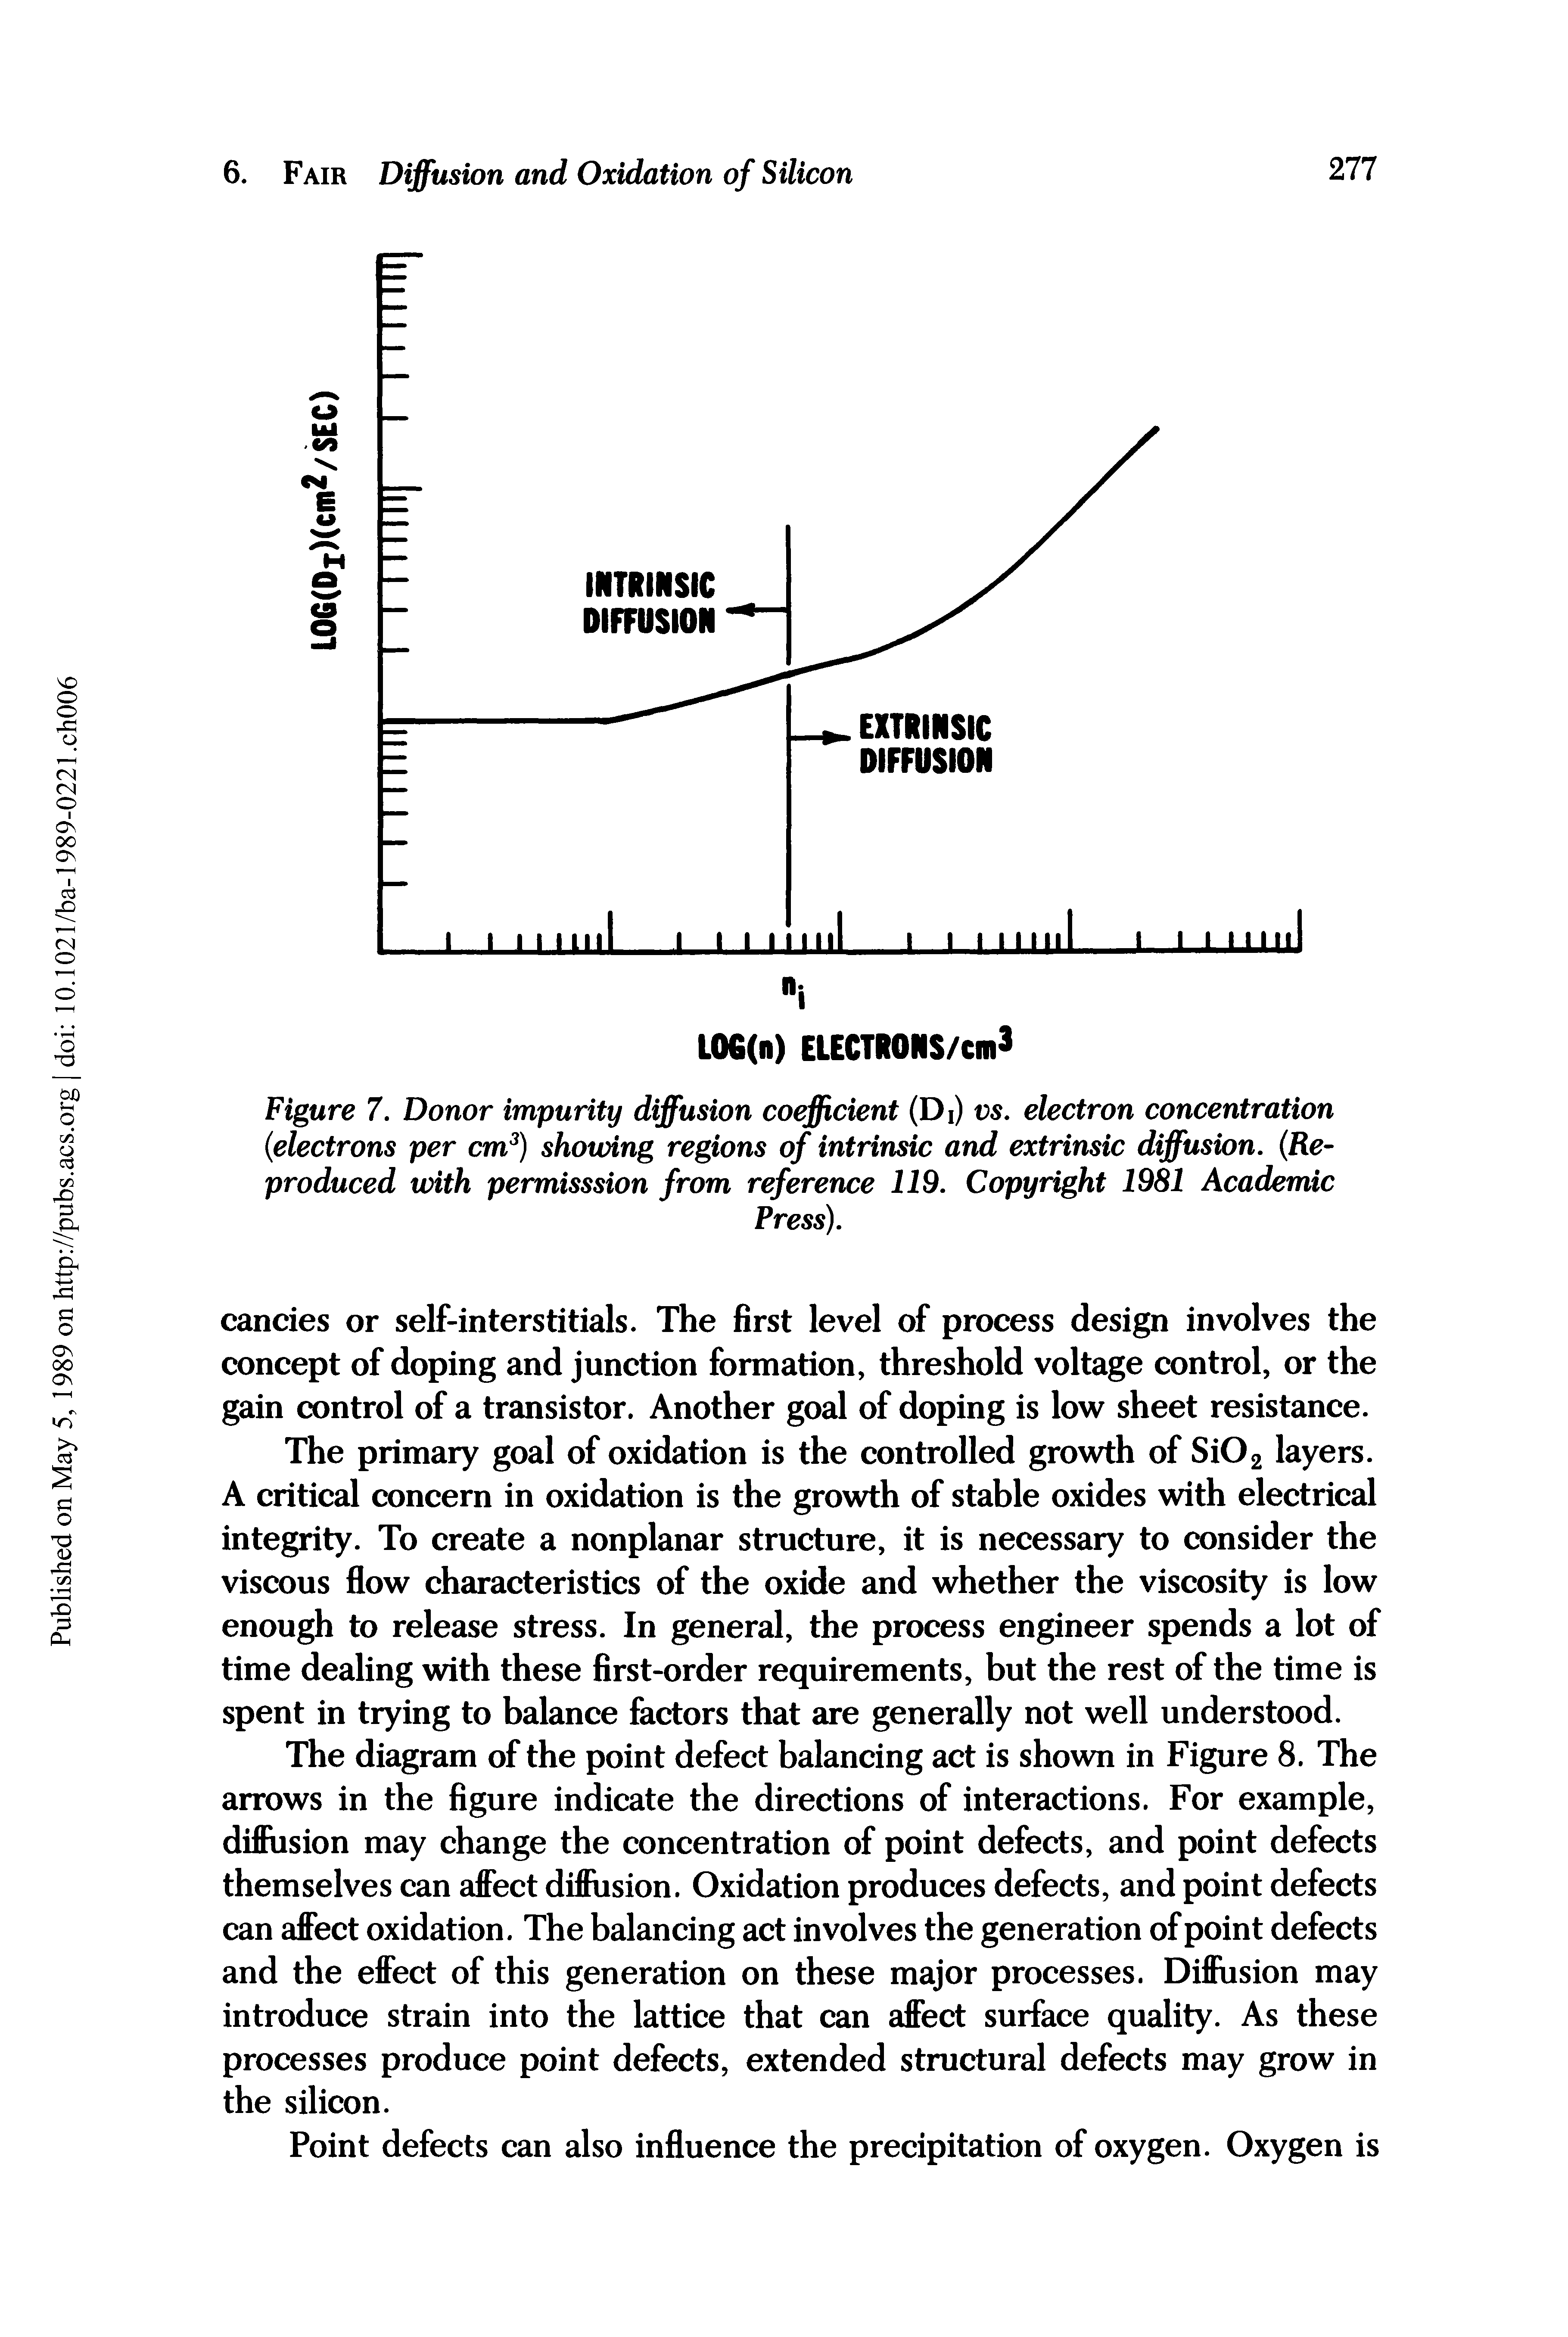 Figure 7. Donor impurity diffusion coefficient (Di) vs. electron concentration (electrons per cm3) showing regions of intrinsic and extrinsic diffusion. (Reproduced with permisssion from reference 119. Copyright 1981 Academic...